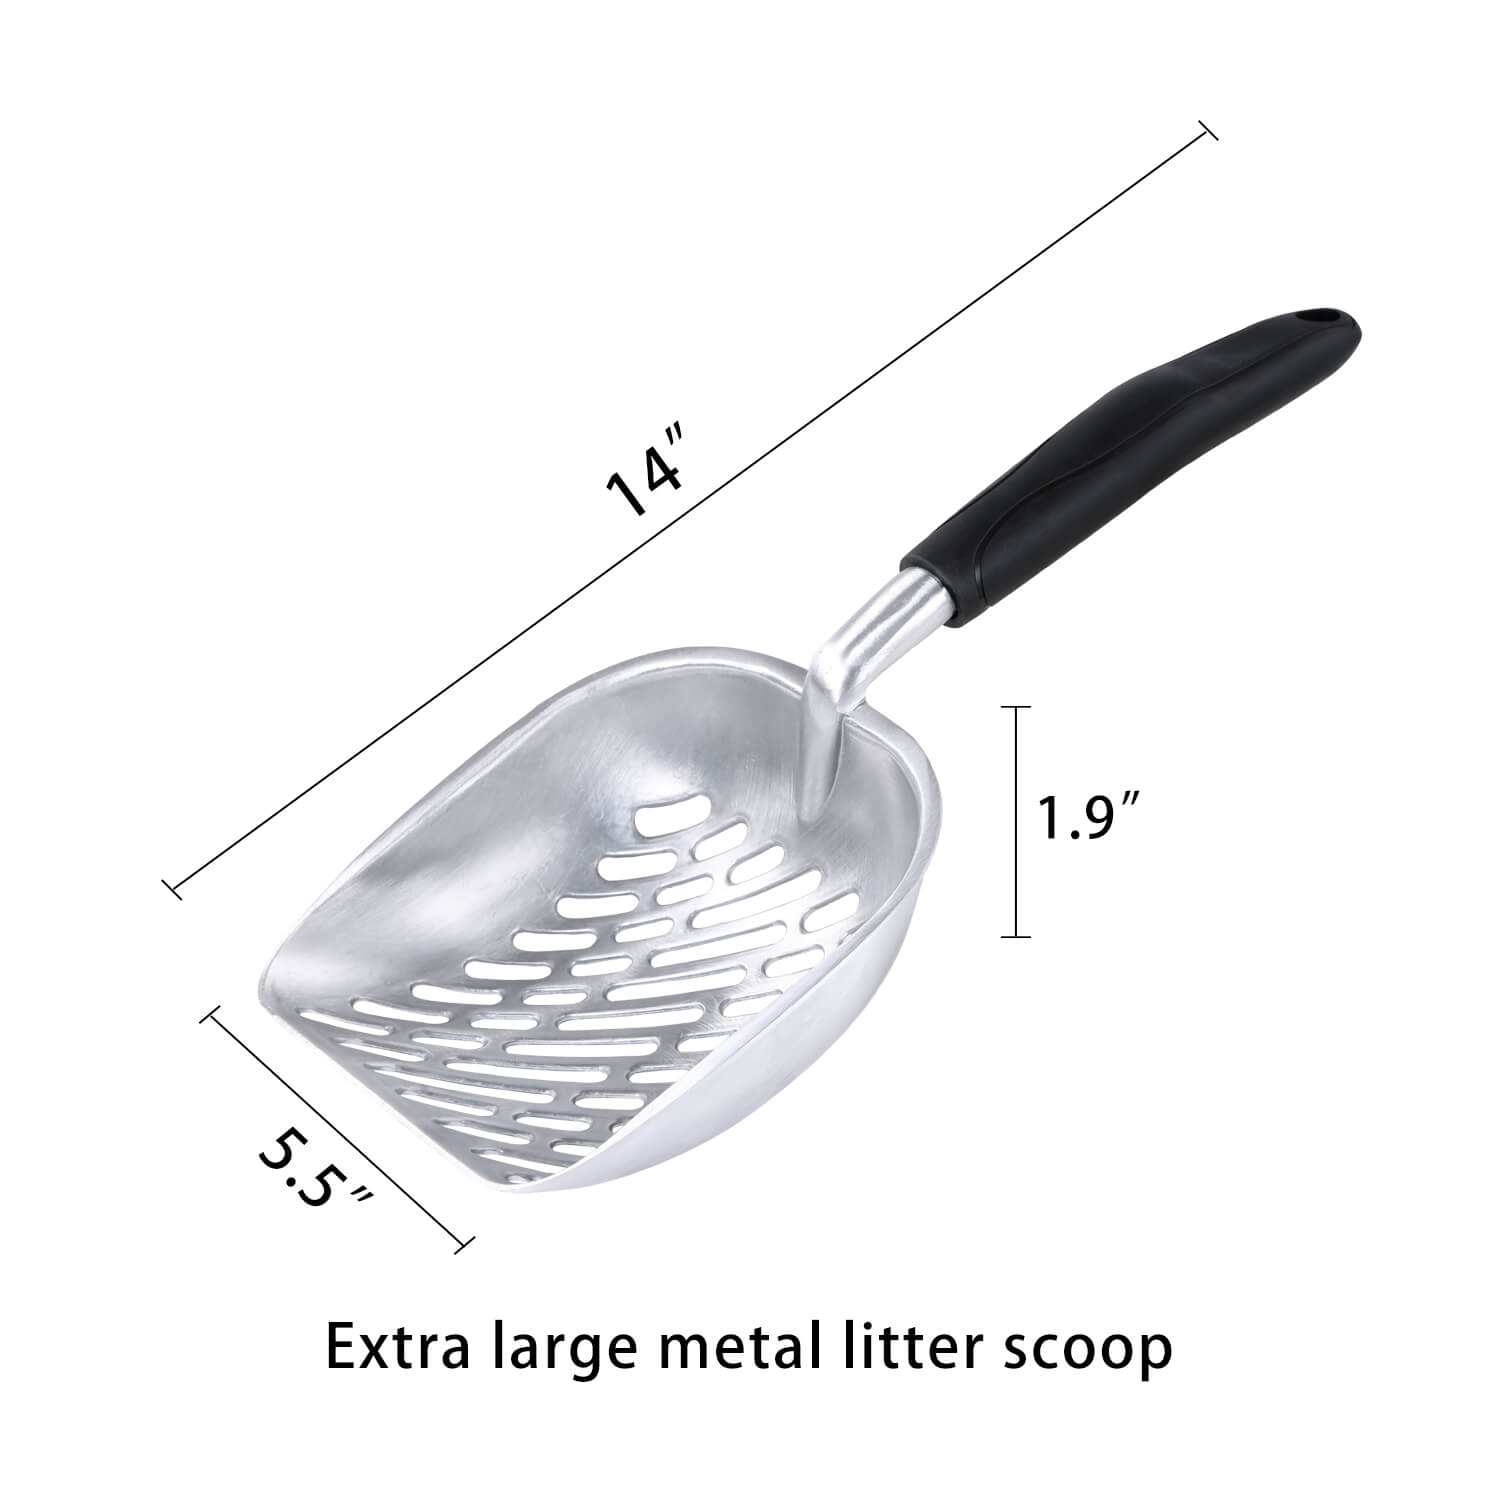 meexpaws stainless steel litter box kit extra large litter scoop